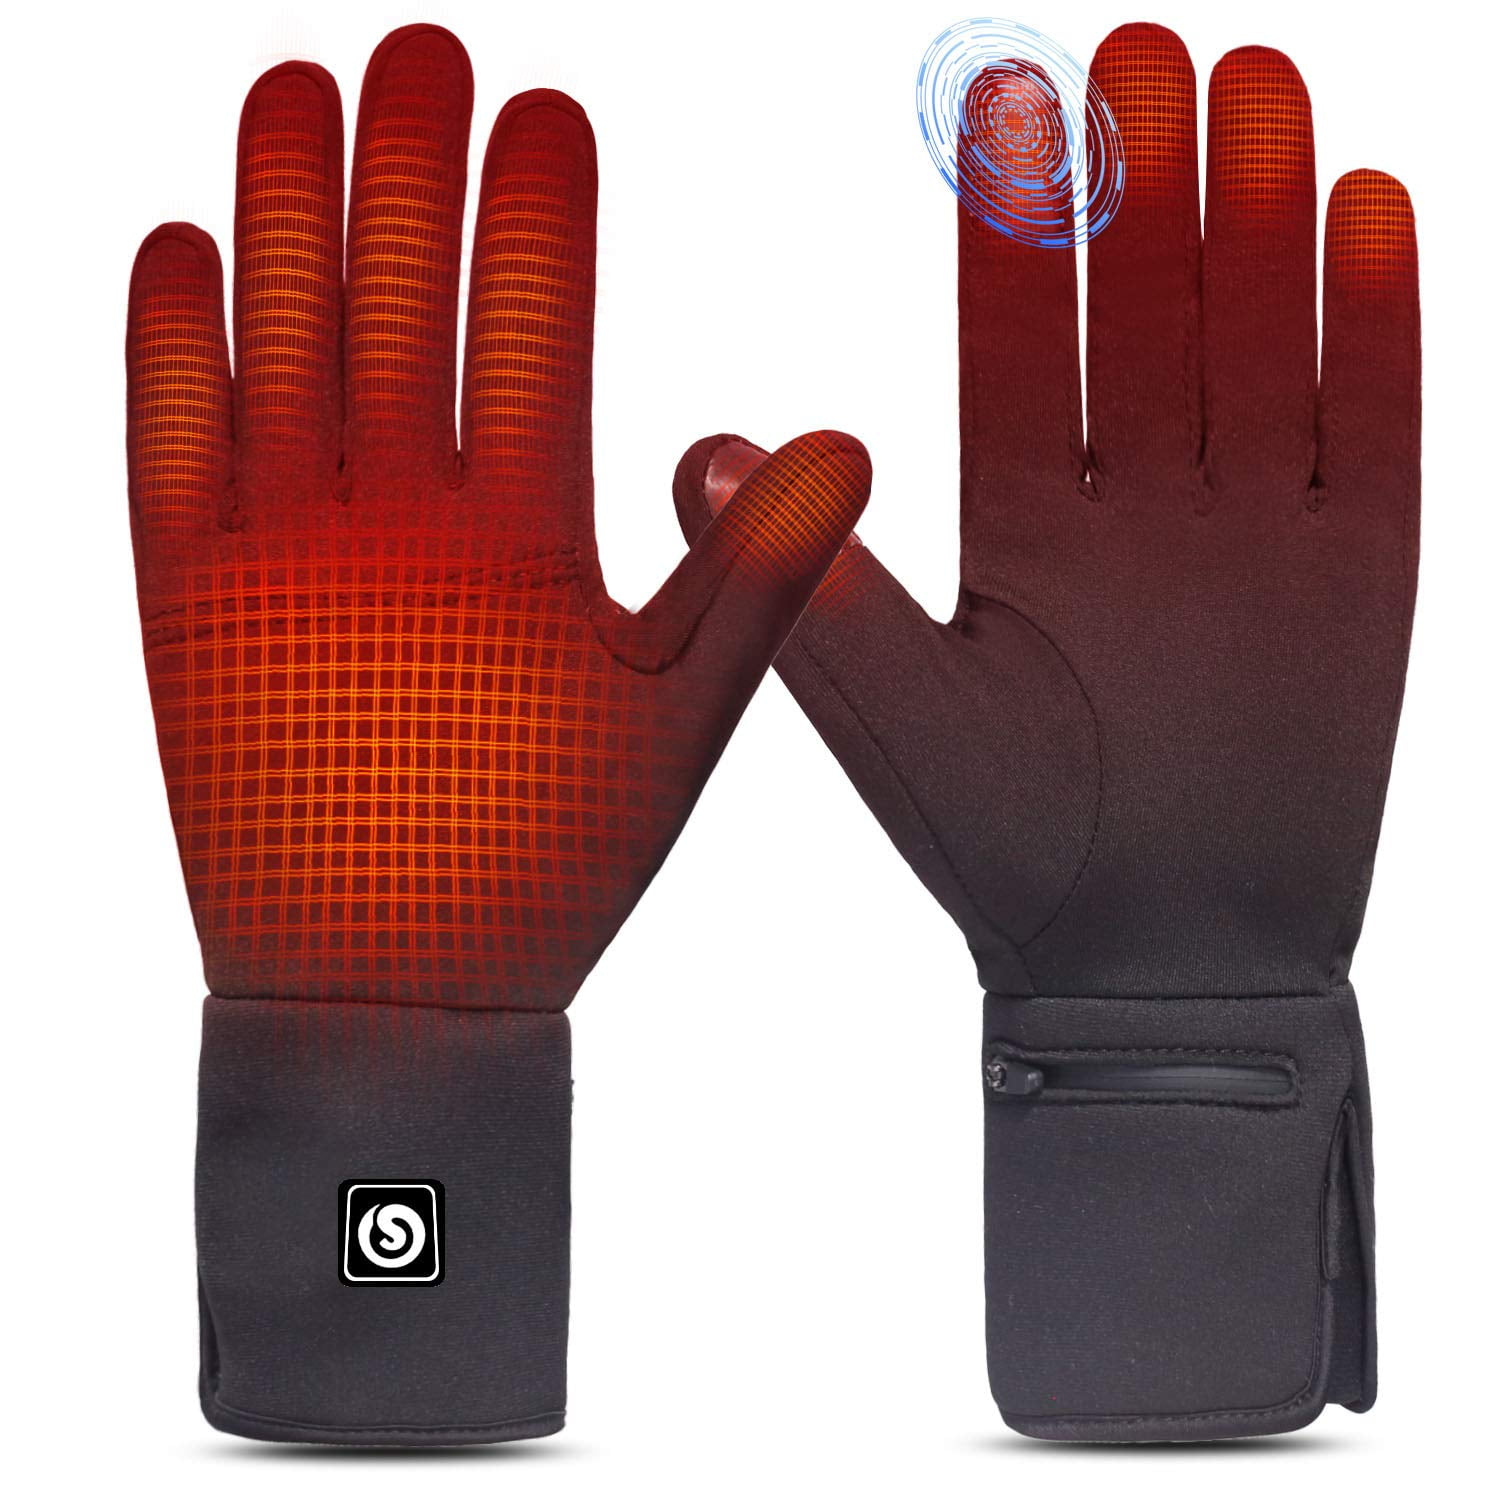 M Brand New Snow Deer Rechargeable Heated Gloves 